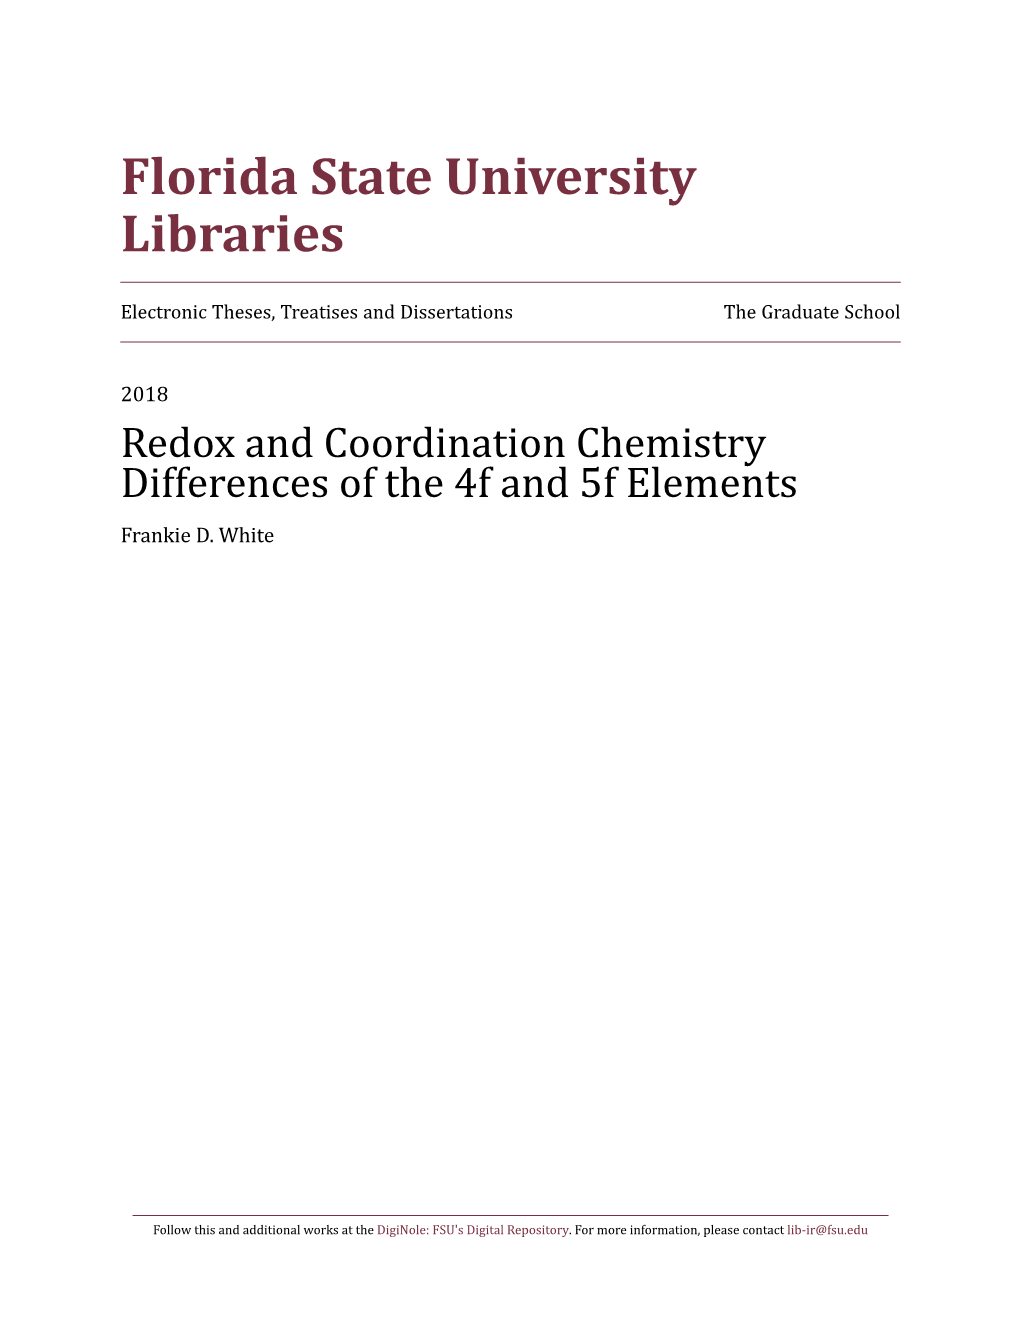 Redox and Coordination Chemistry Differences of the 4F and 5F Elements